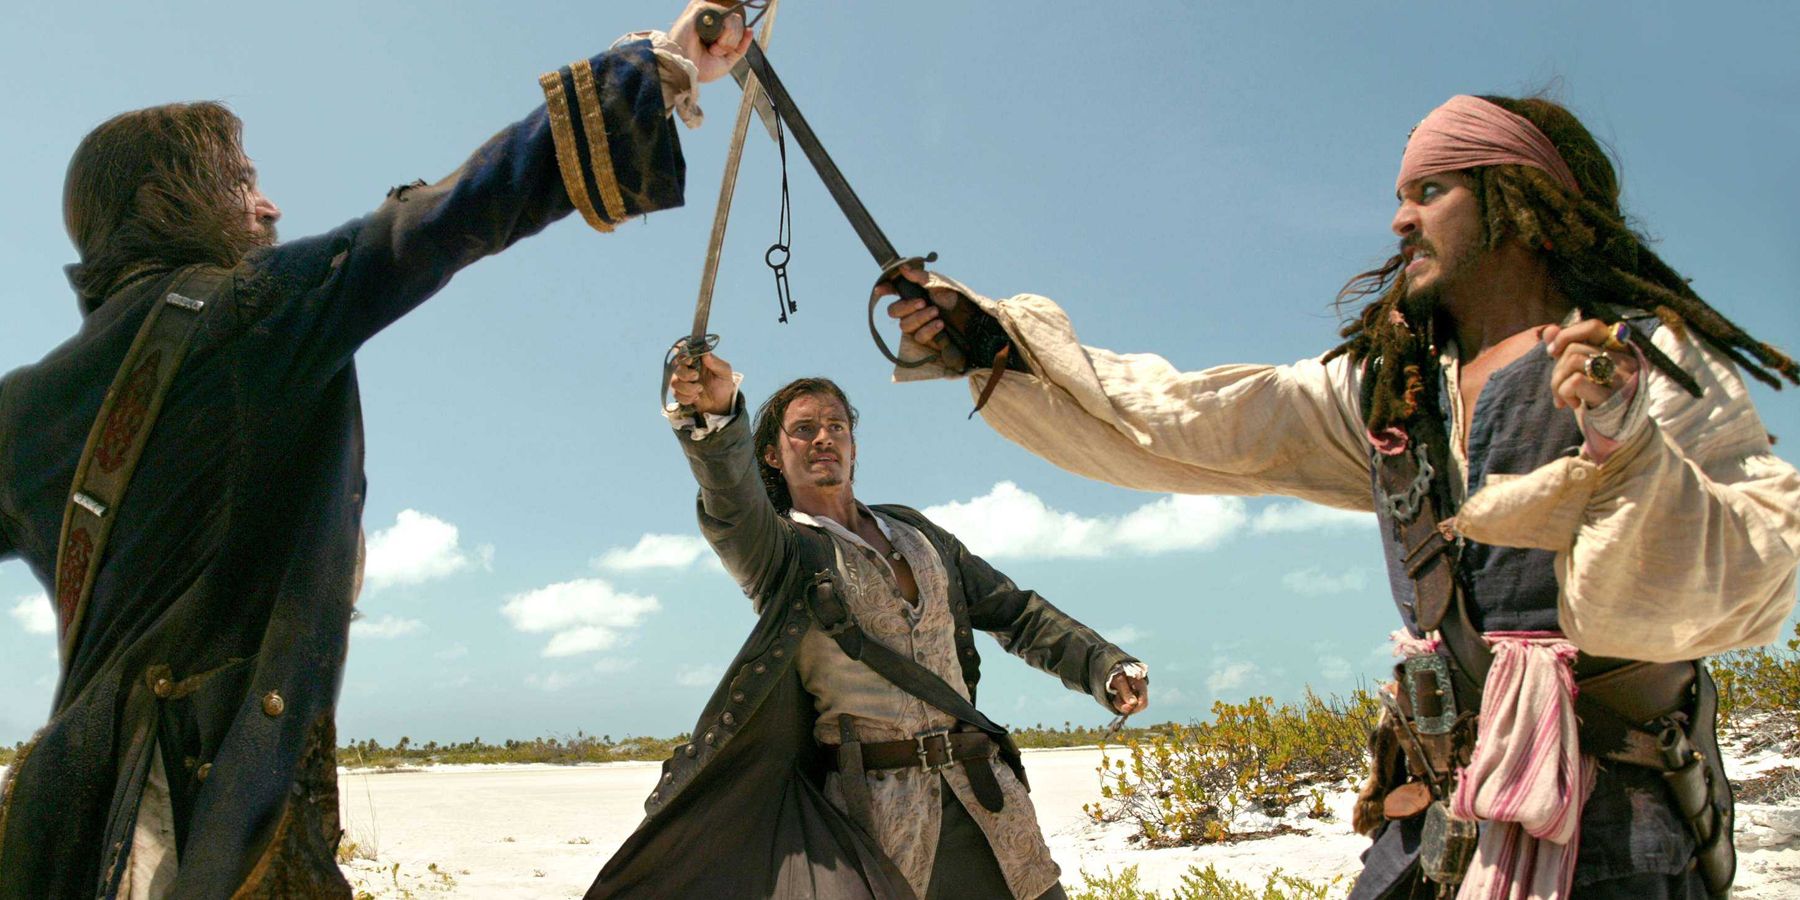 Pirates of the Caribbean dead man's chest sparrow and will sword fight